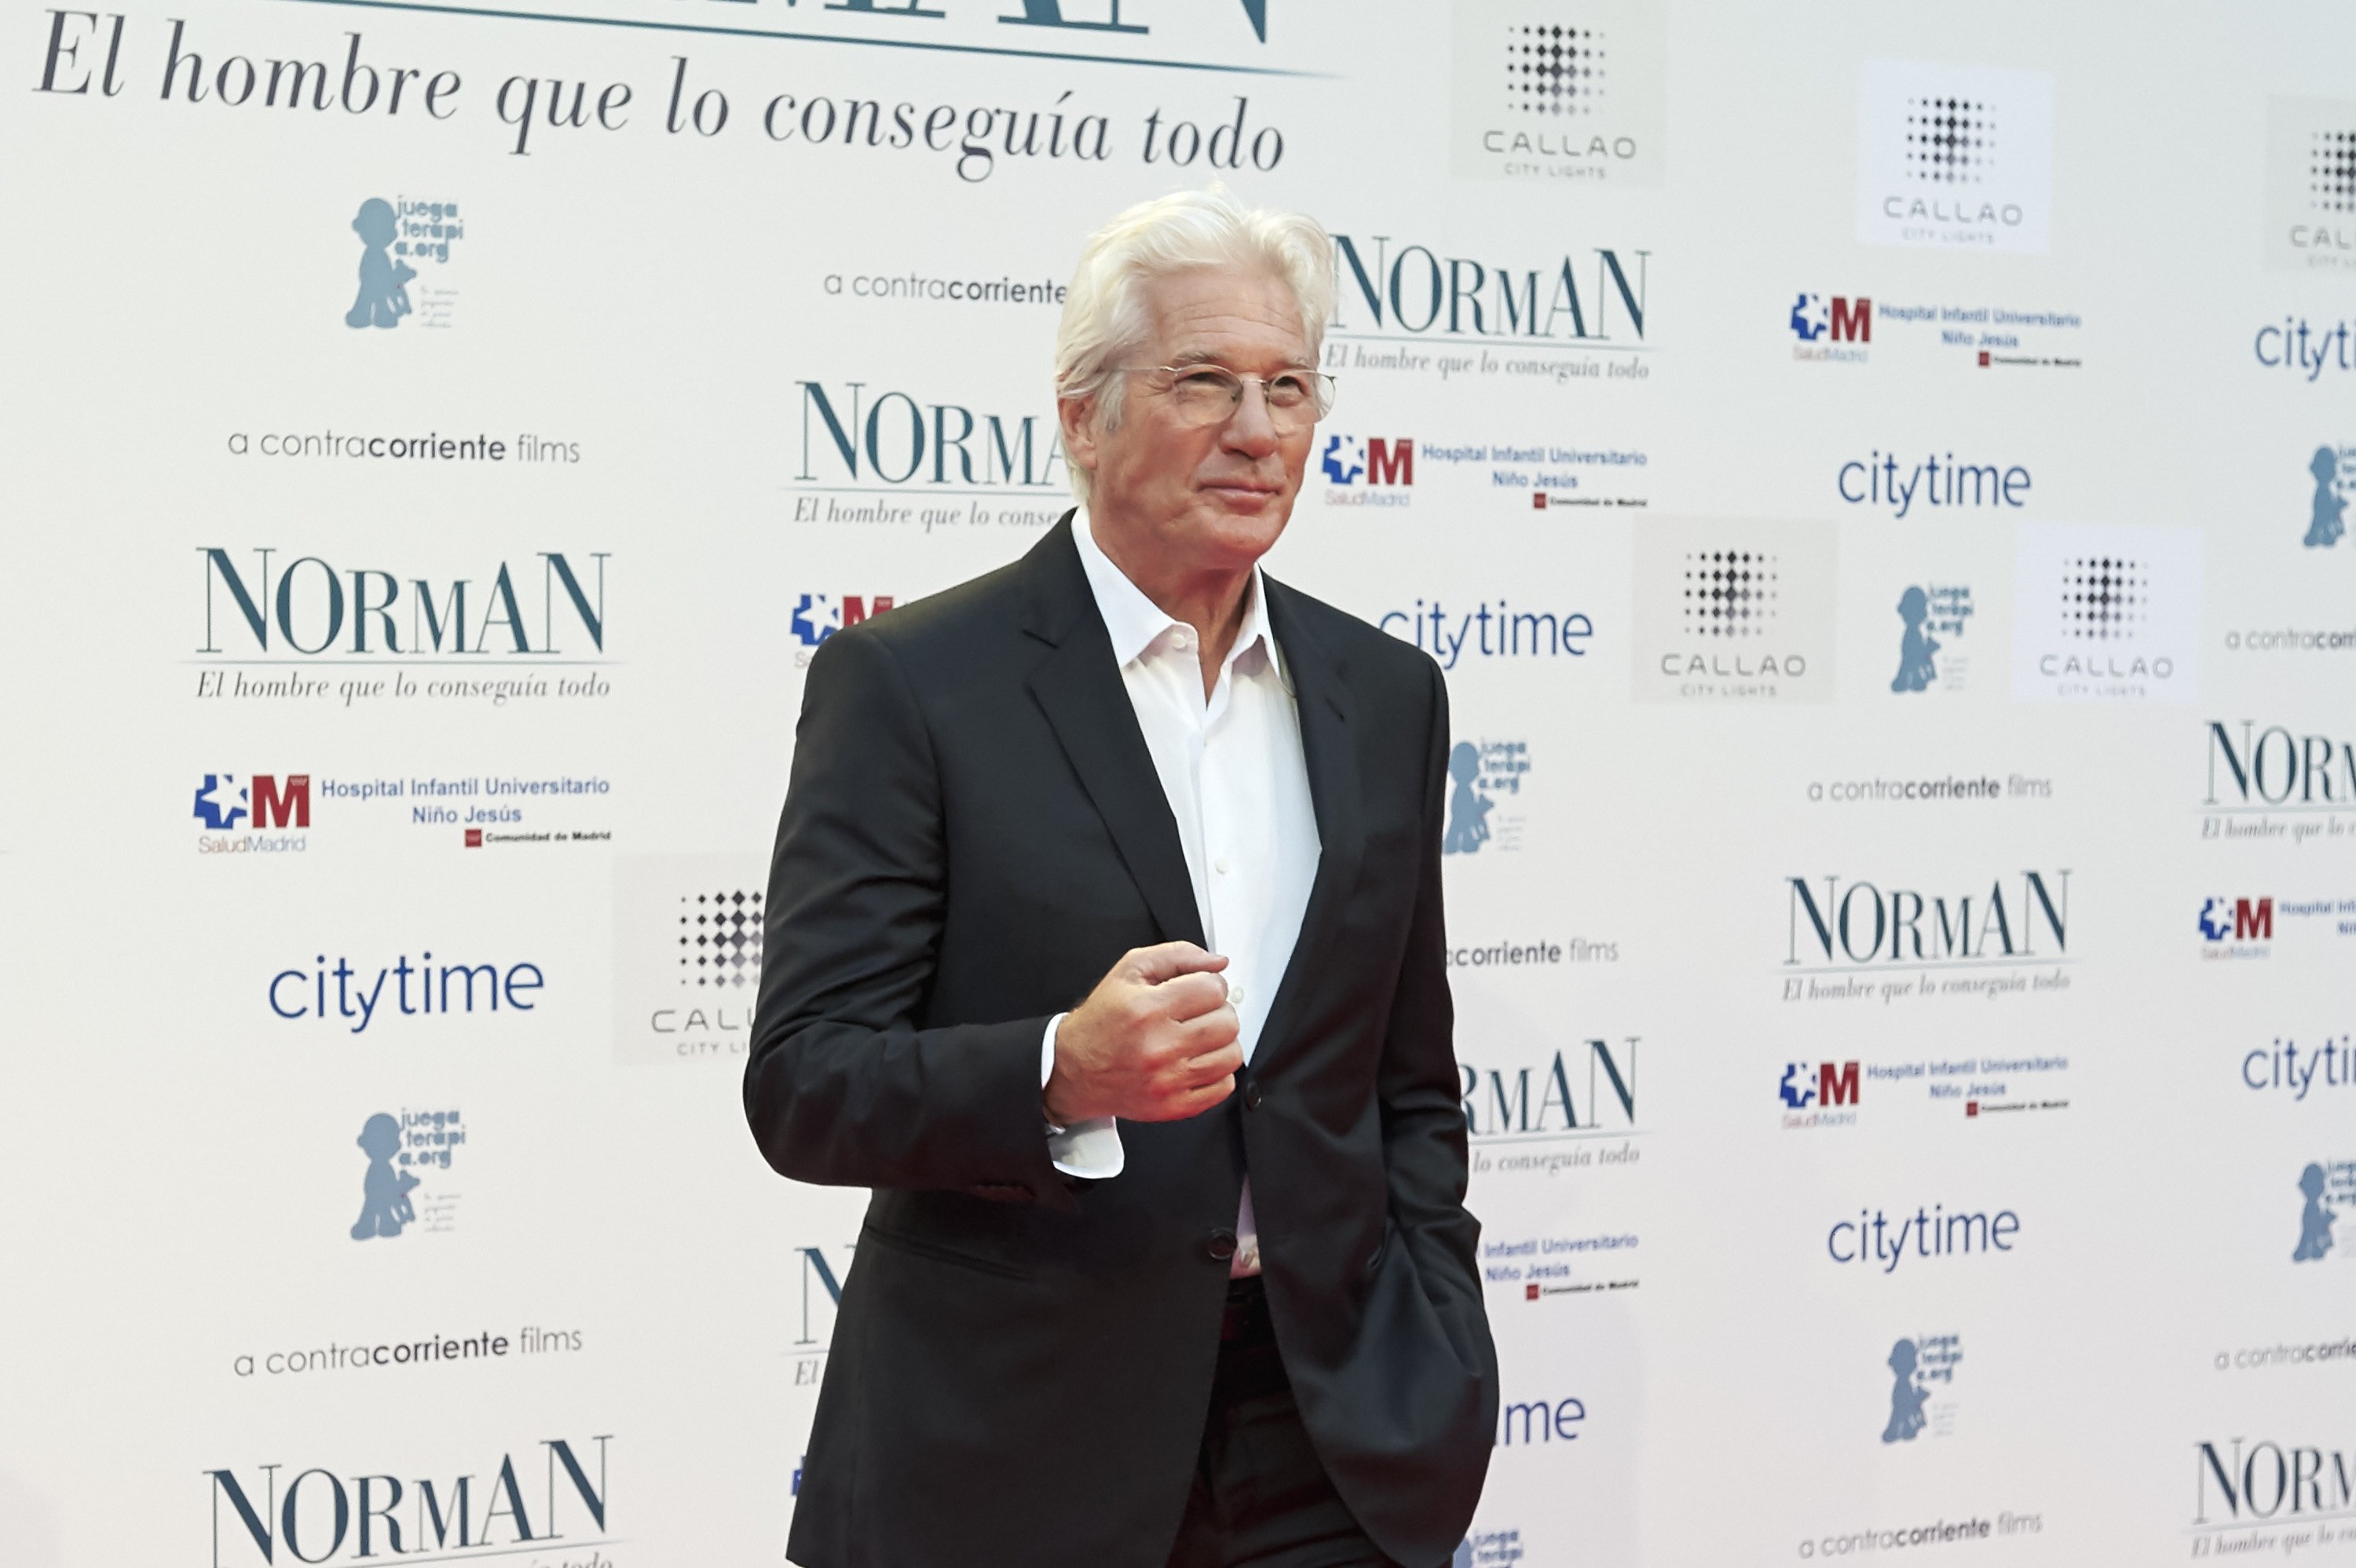  Actor Richard Gere at the 'Norman: The Moderate Rise and Tragic Fall of a New York Fixer' premiere at the Callao cinema on May 31, 2017 in Madrid, Spain. | Source: Getty Images